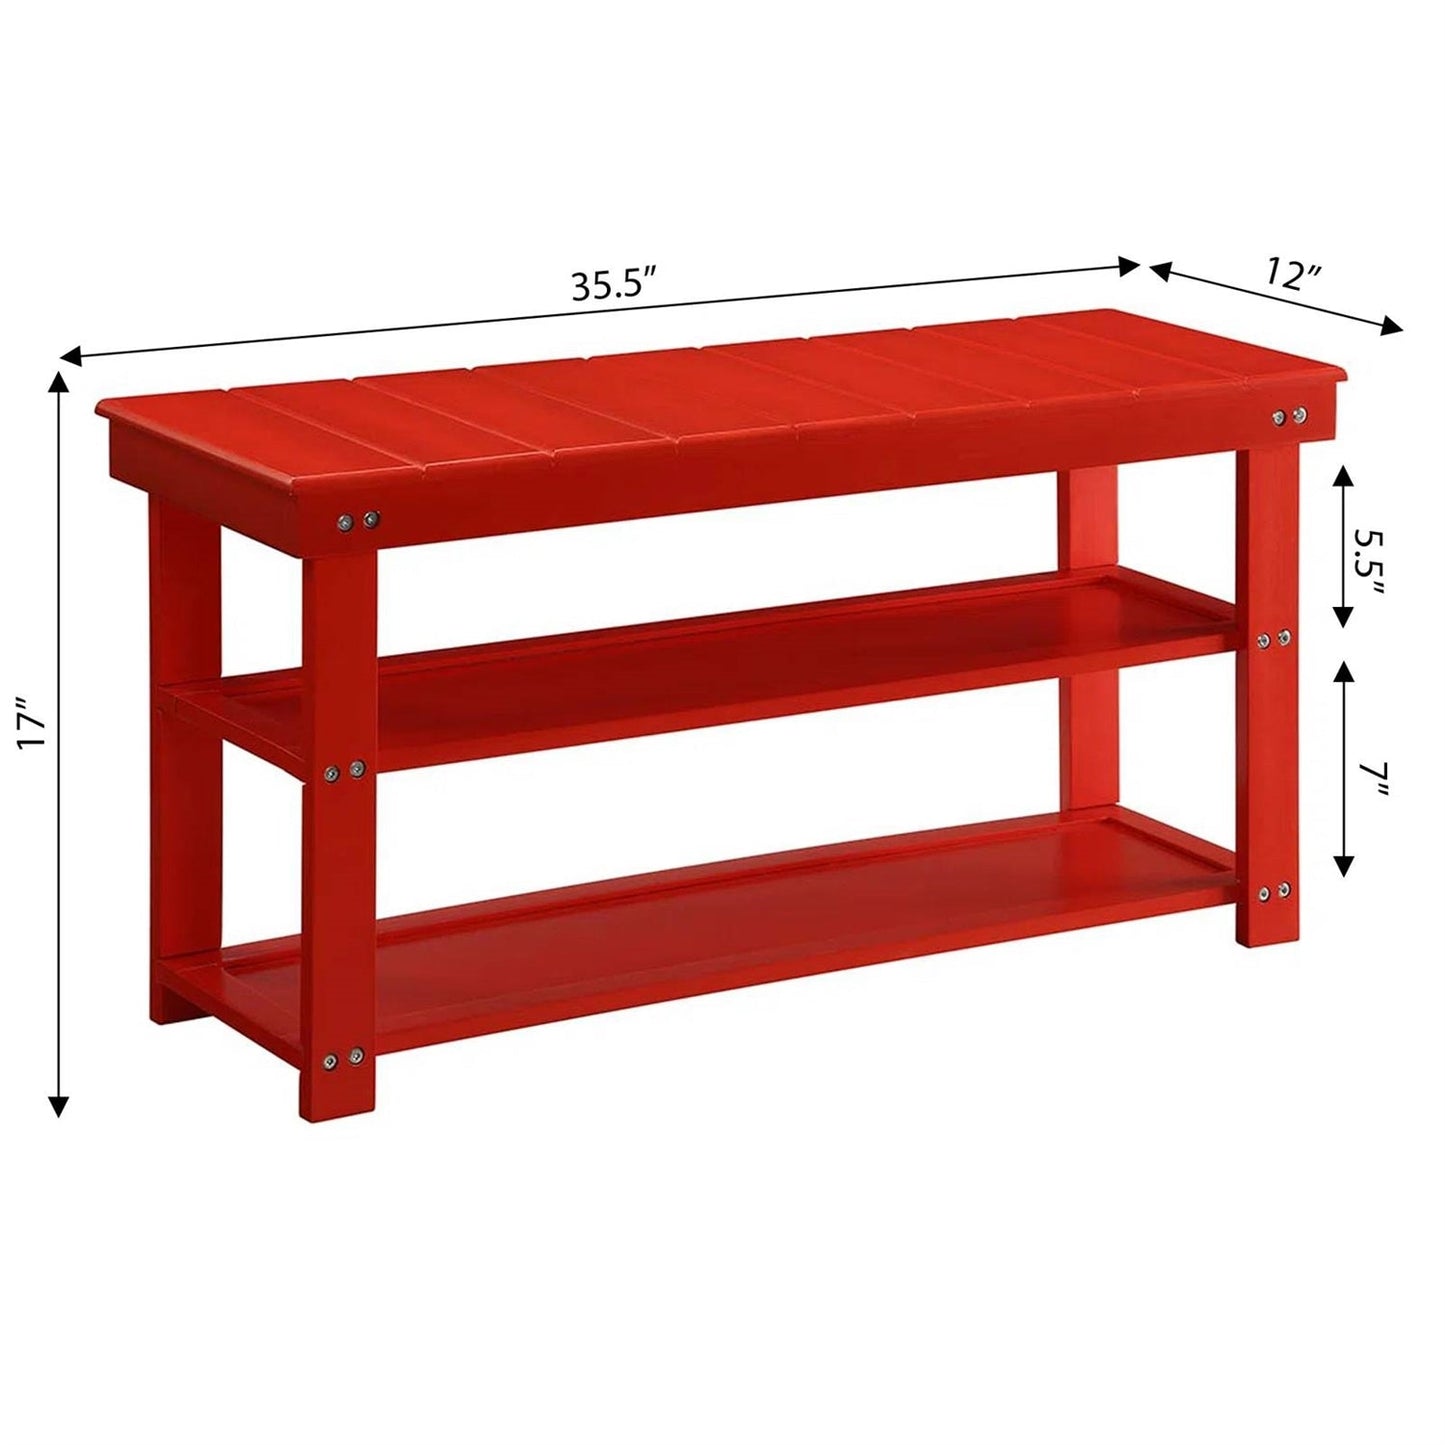 Accents > Shoe Racks - Red Wooden 2-Shelf Shoe Rack Storage Bench For Entryway Or Closet